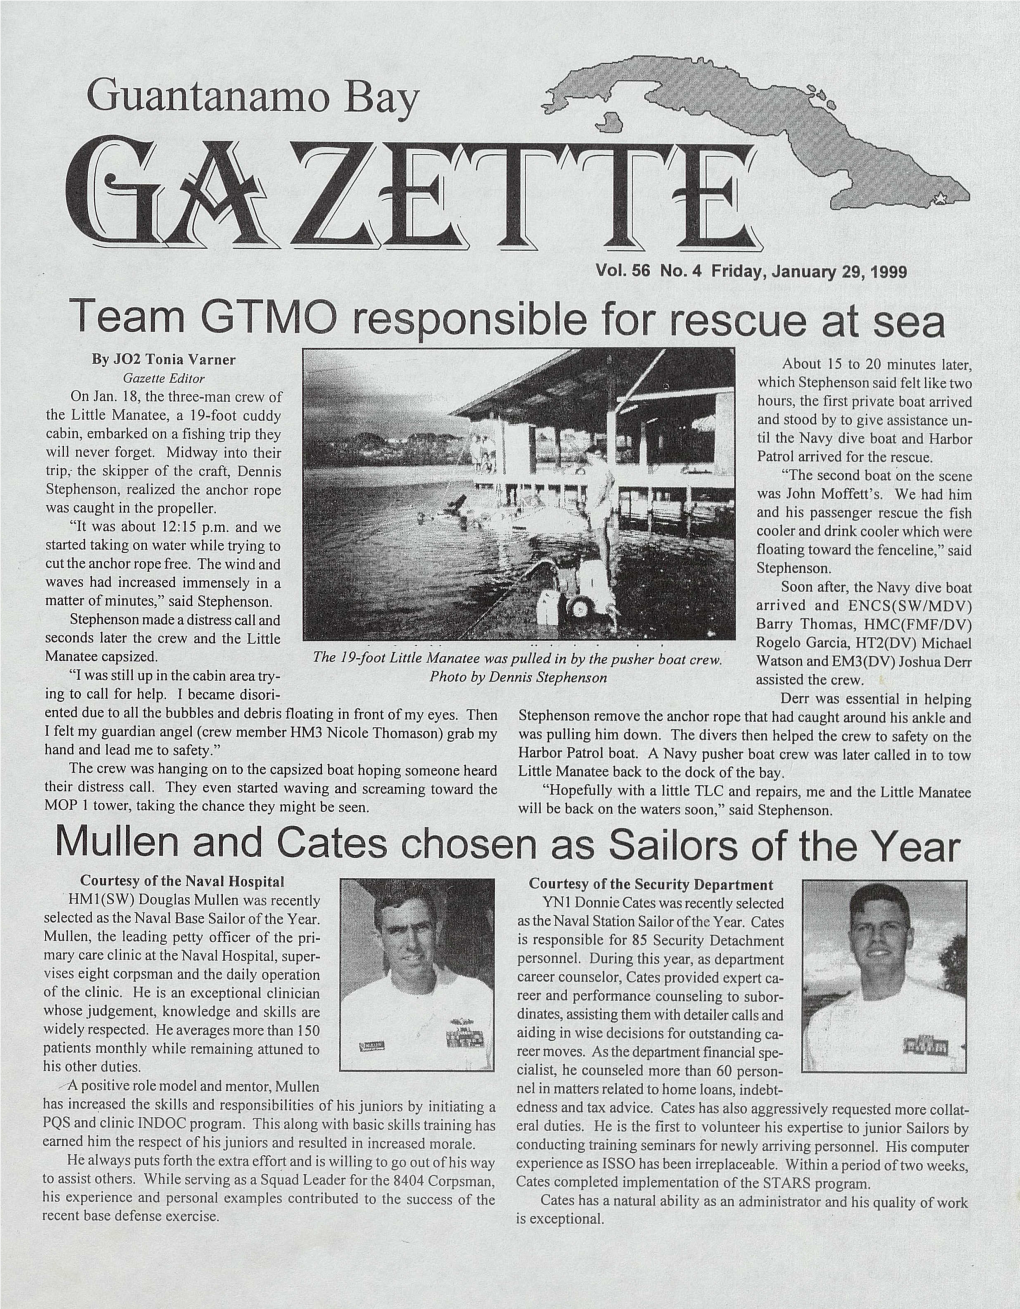 Team GTMO Responsible for Rescue at Sea by J02 Tonia Varner About 15 to 20 Minutes Later, Gazette Editor Which Stephenson Said Felt Like Two on Jan